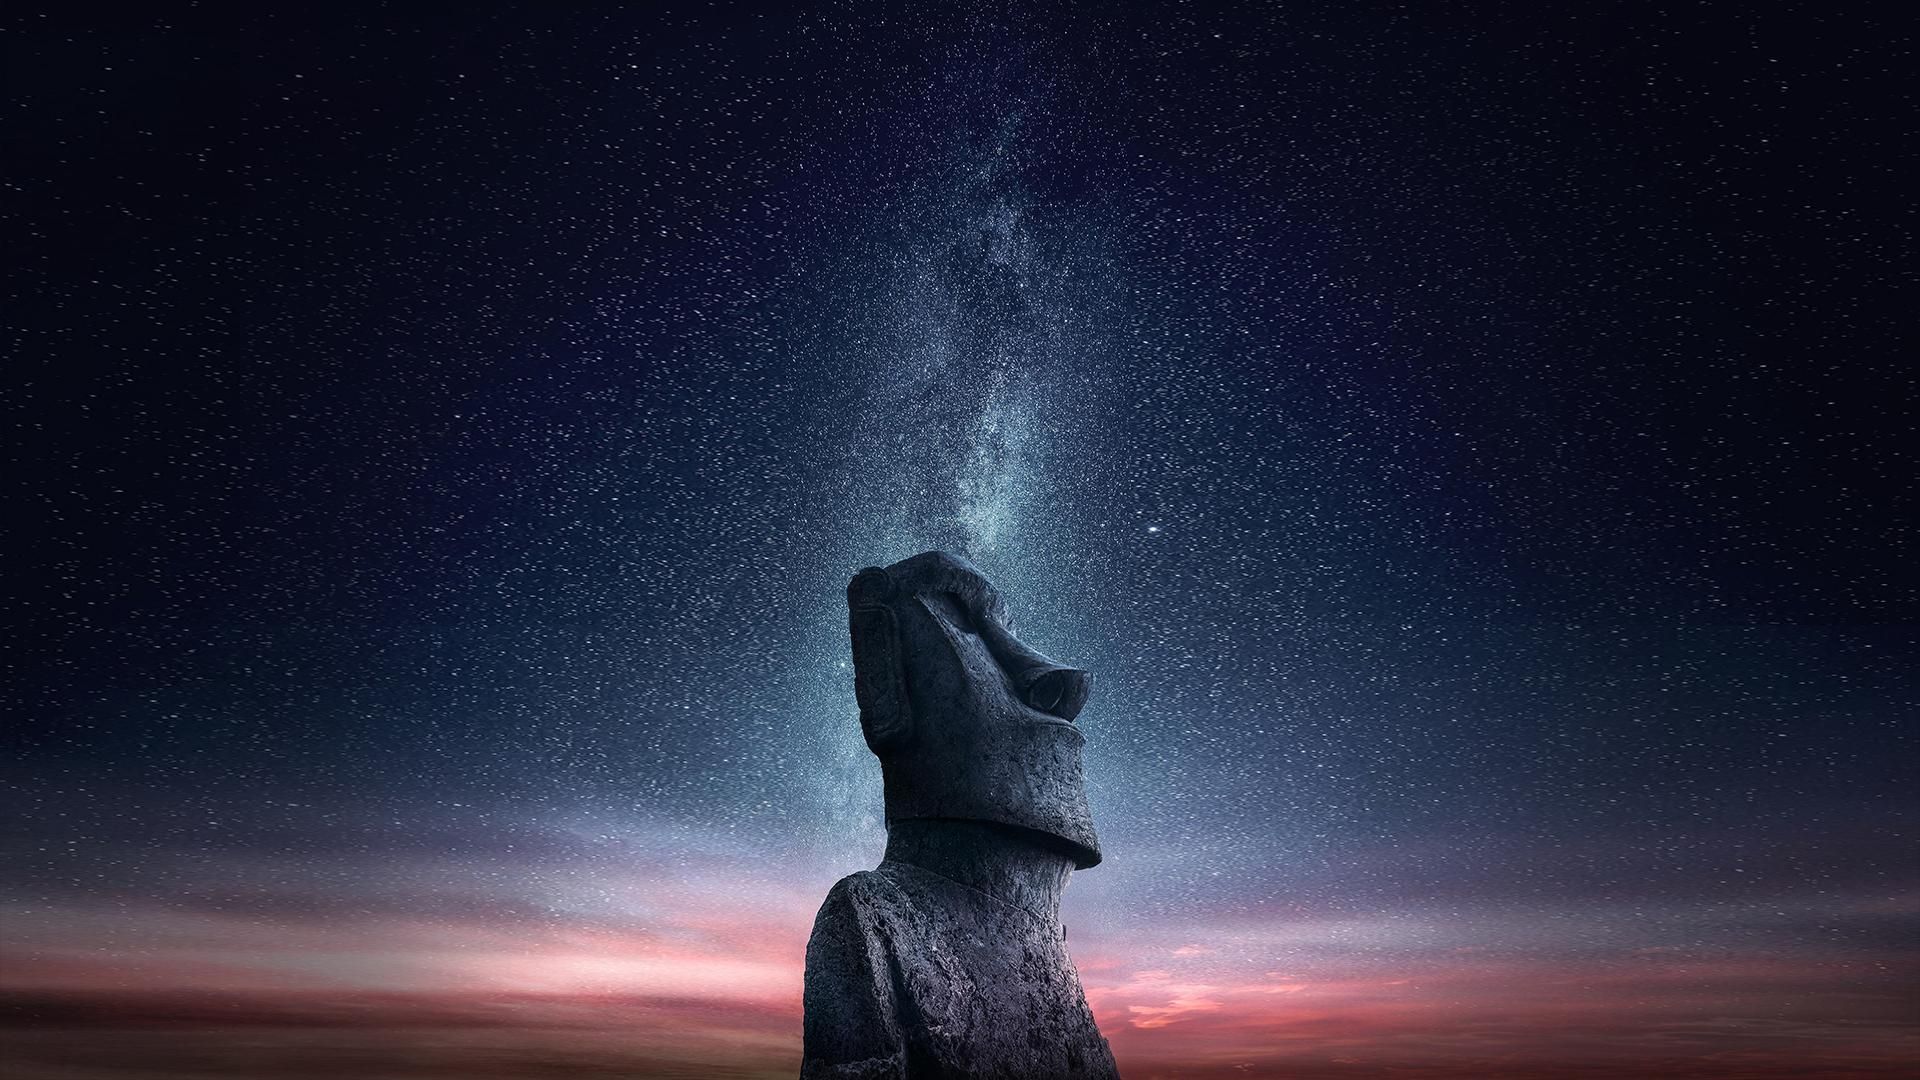 I just made a horizontal version for computer of my famous Moai